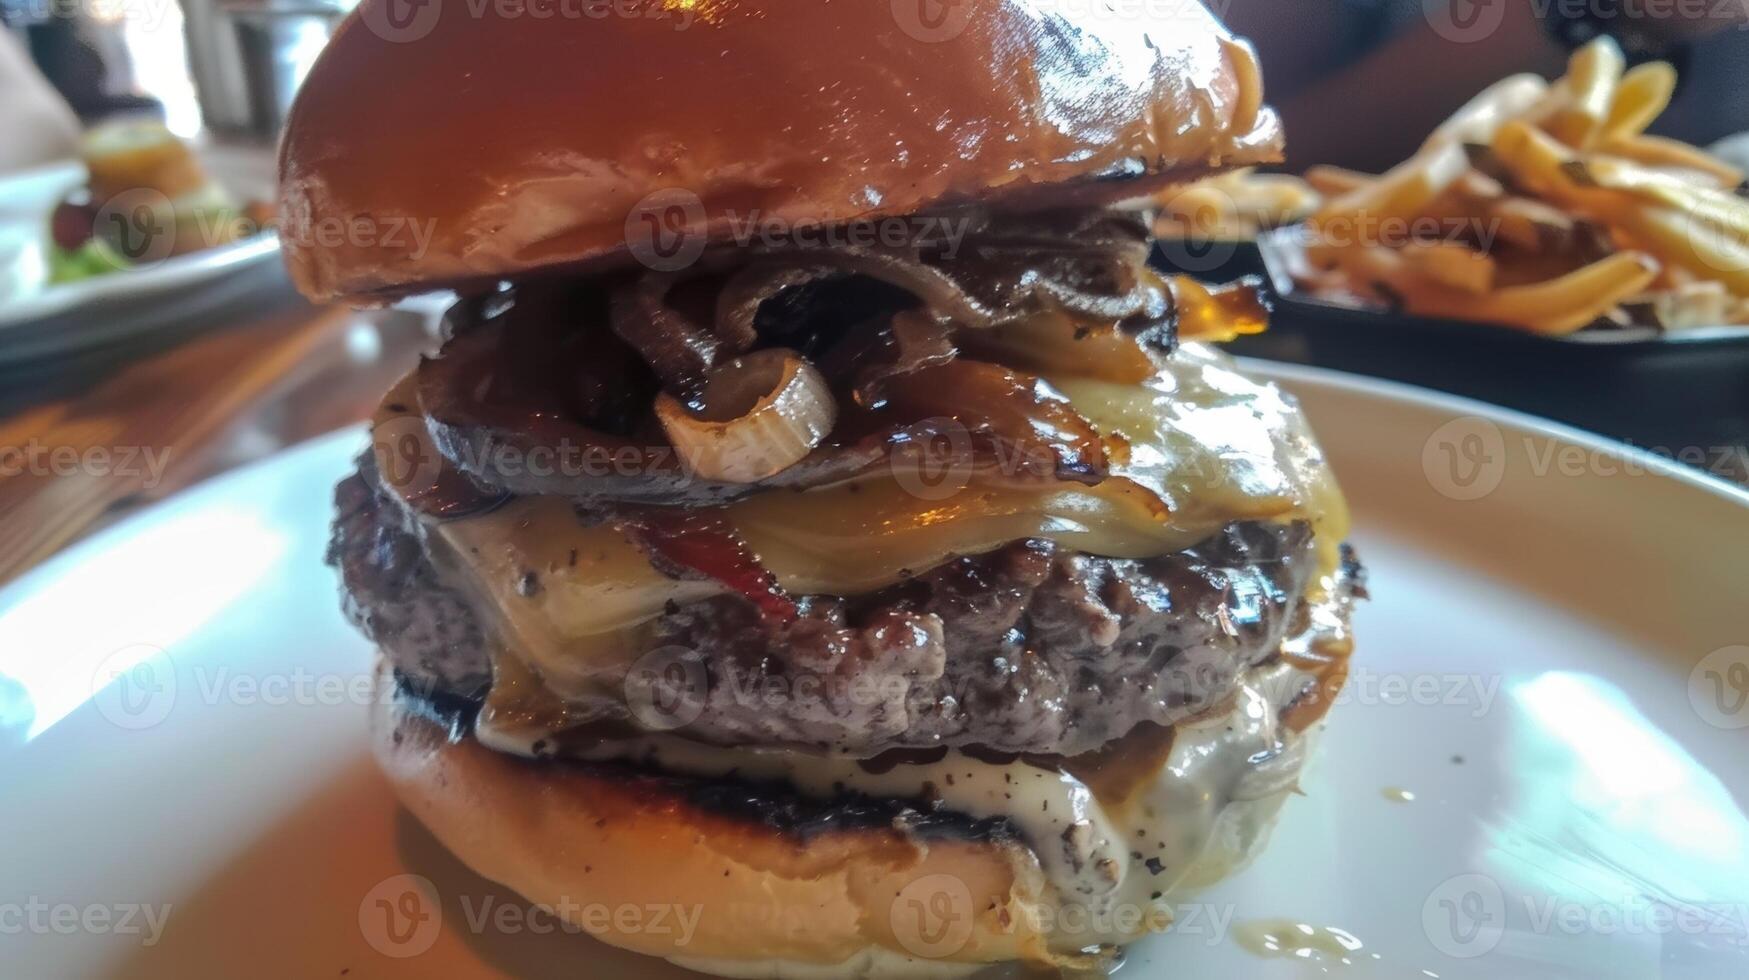 A gourmet burger piled high with caramelized onions avocado aioli and a dollop of black truffle mayo all served in a trendy burger joint photo